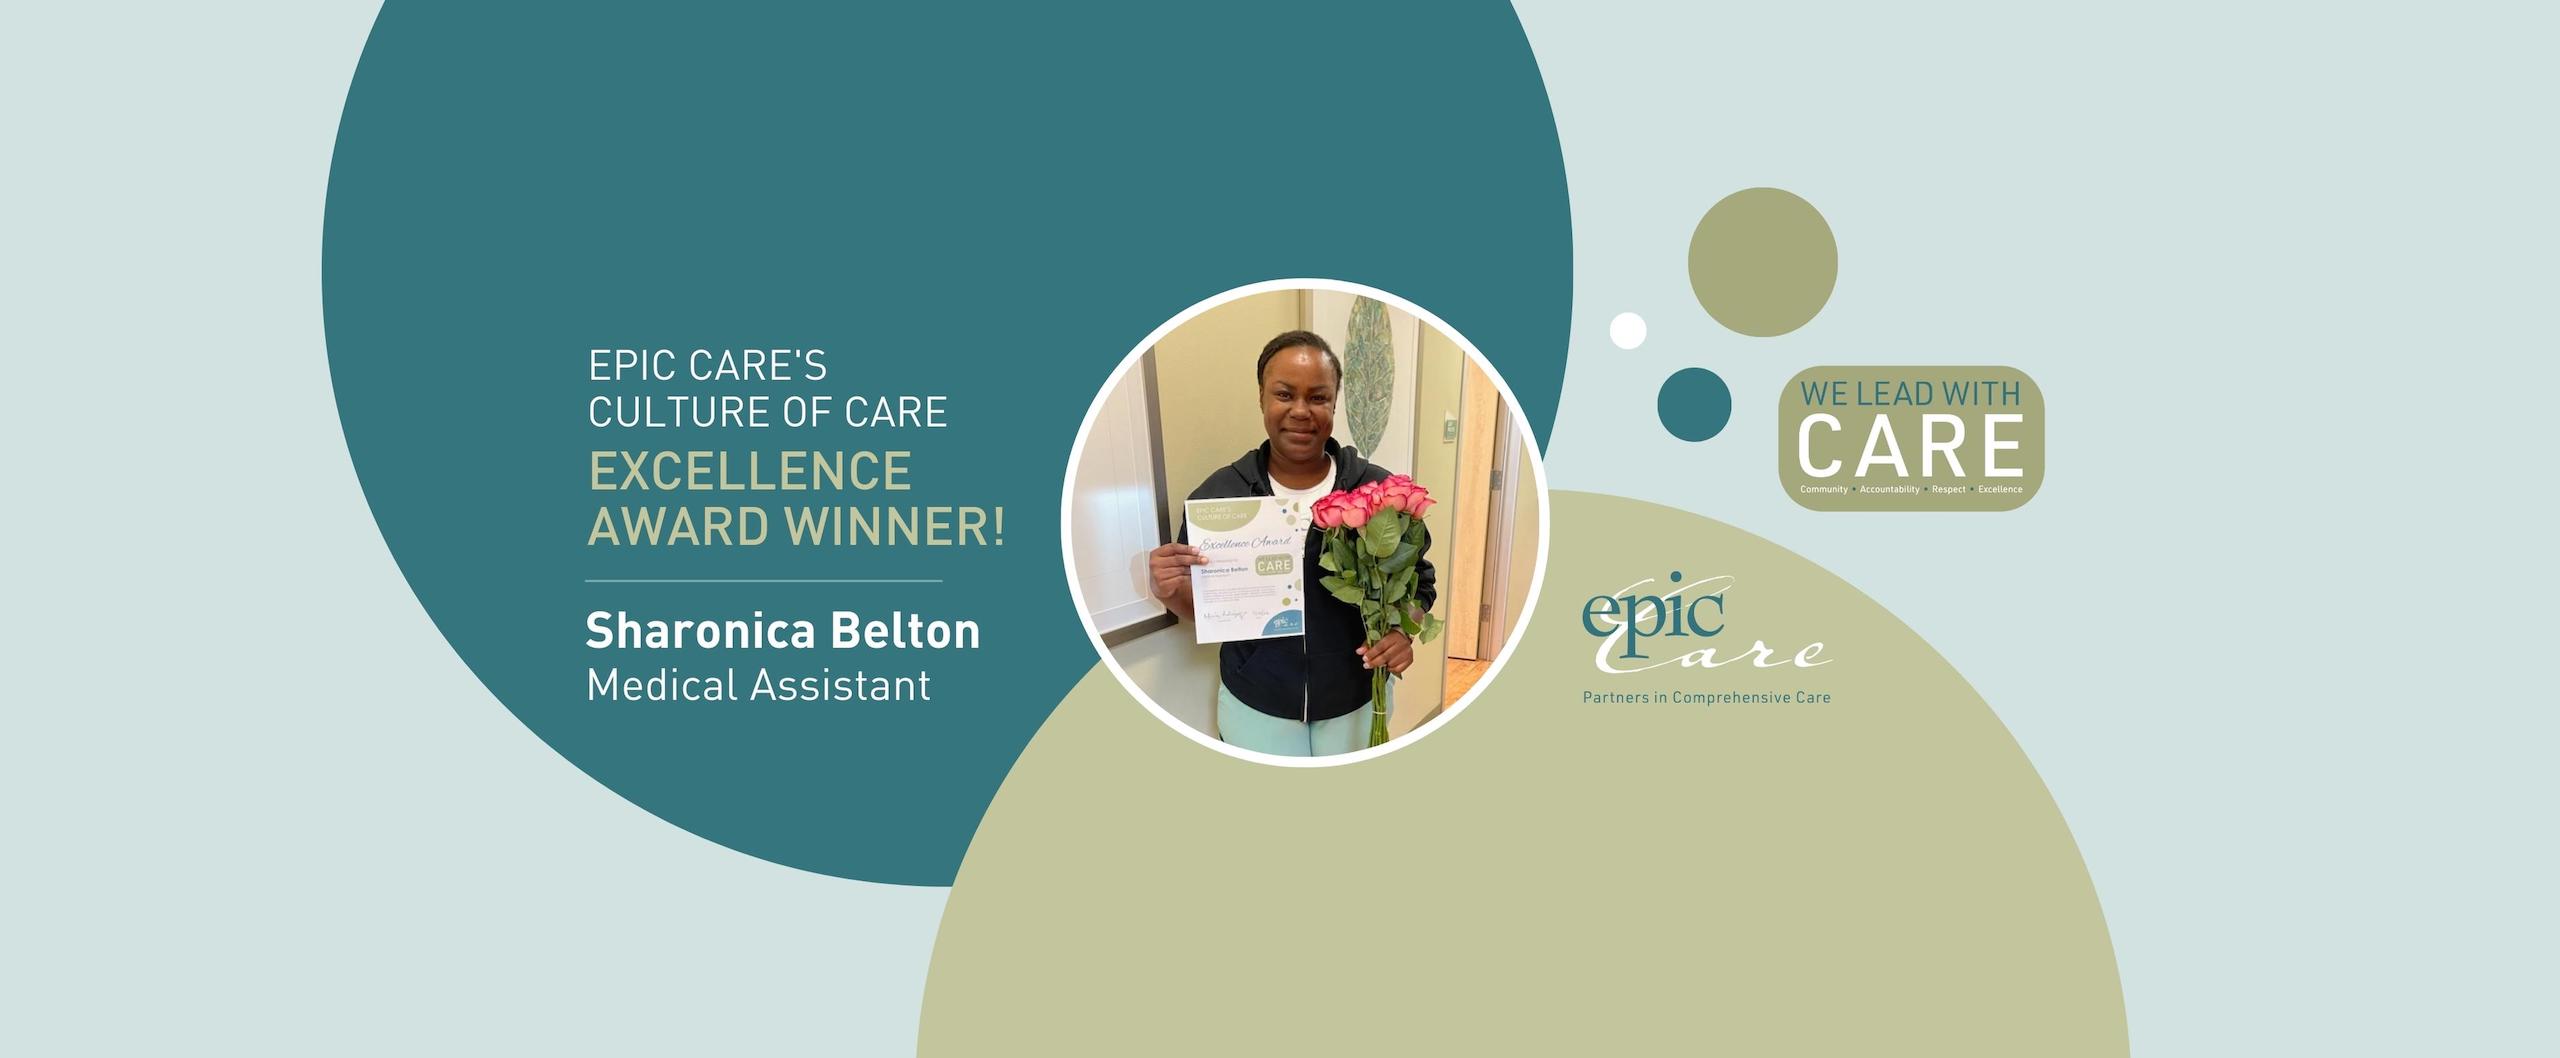 Epic Care’s Culture of CARE Excellence Award Winner! – Sharonica Belton